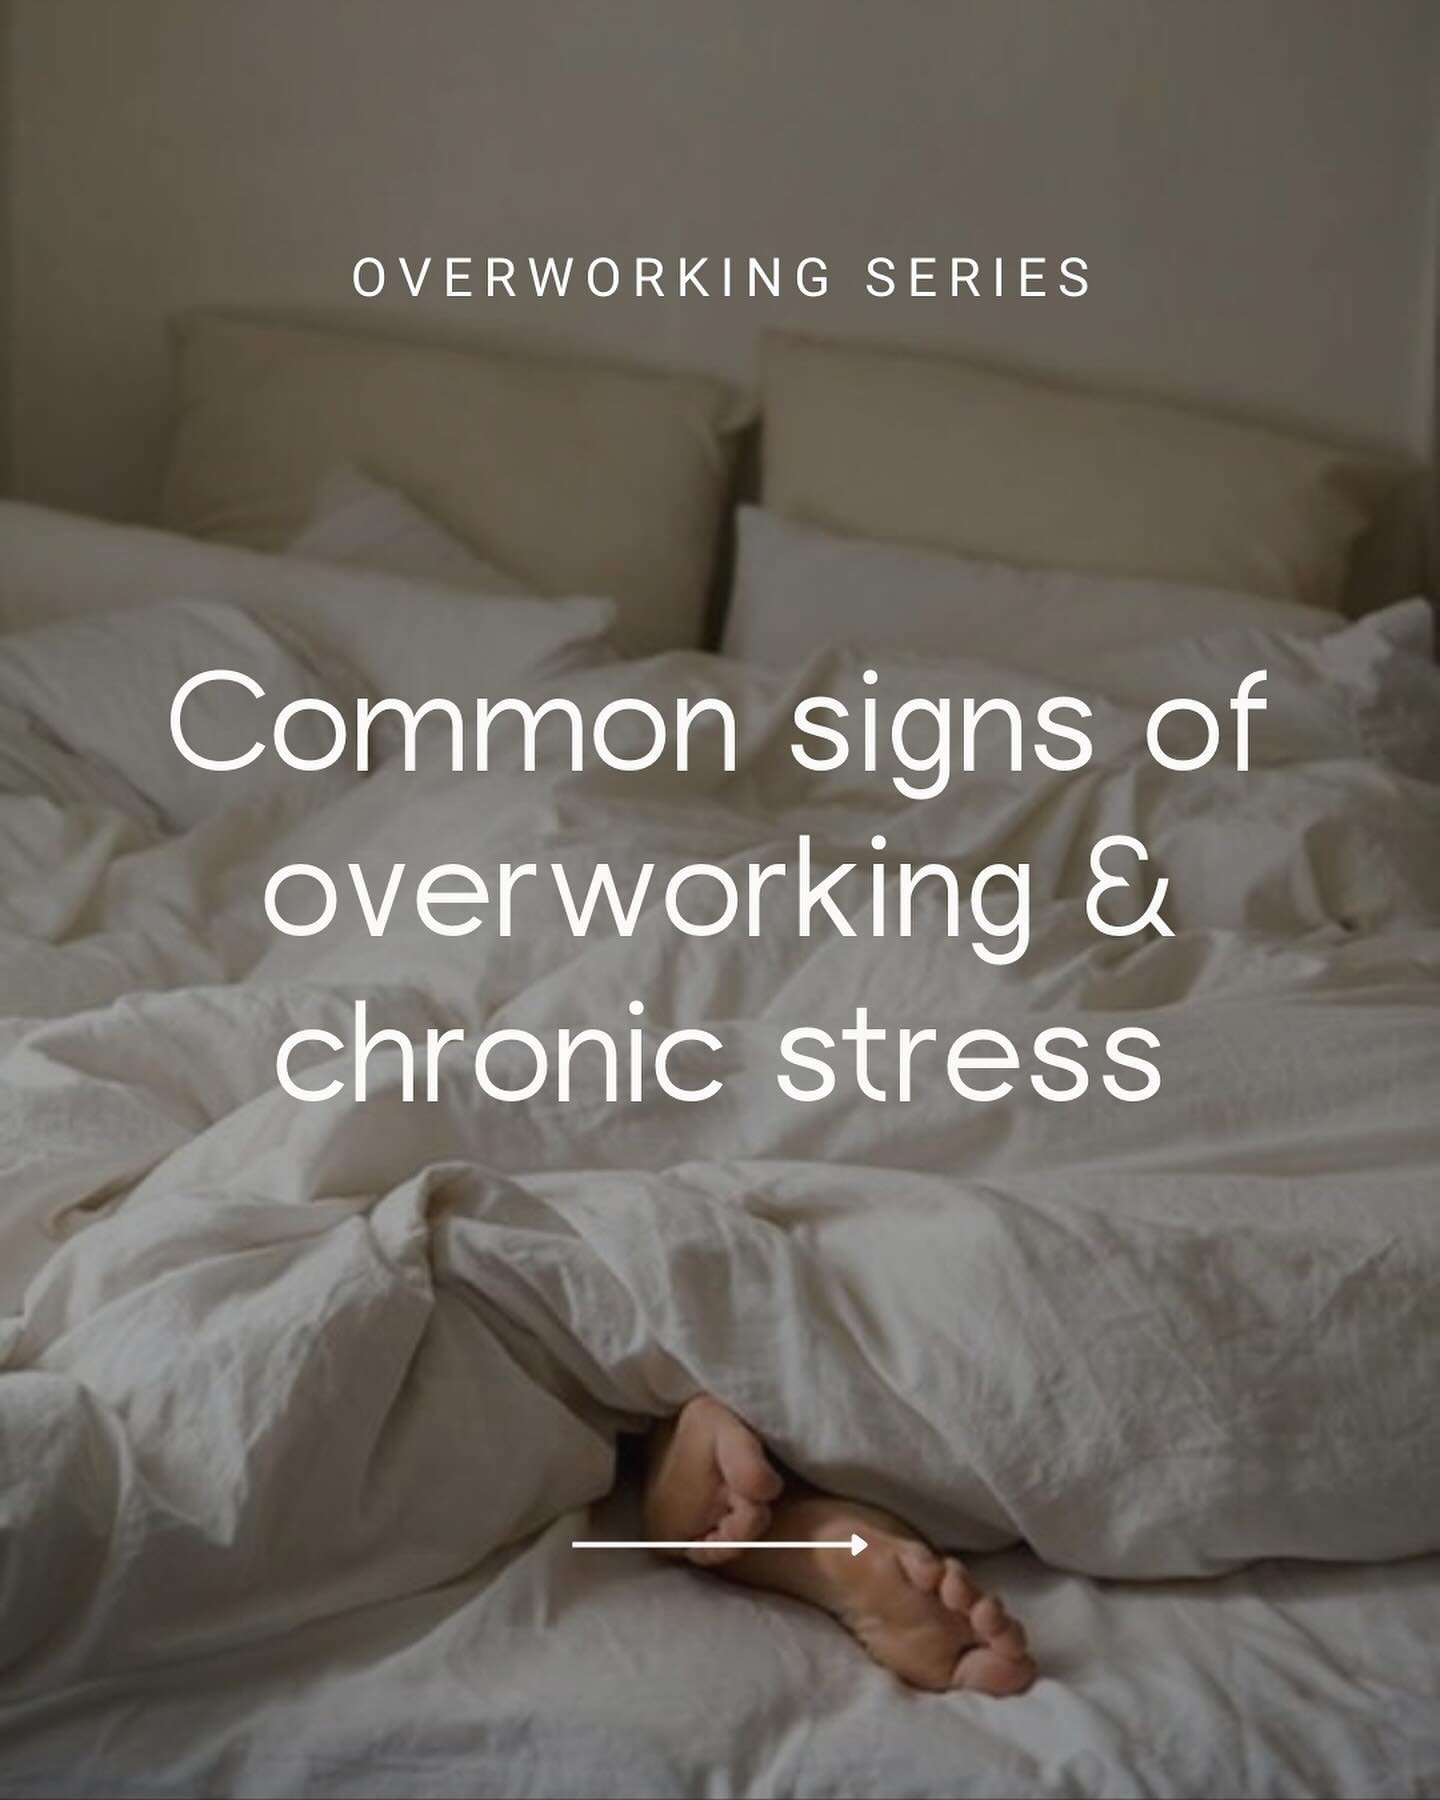 Sooooo many people around me (including myself) have gone through one or multiple burnouts, extended periods of overworking or chronic fatigue. 

I think one reason for this is that many of the symptoms that soooo many people have nowadays are not li